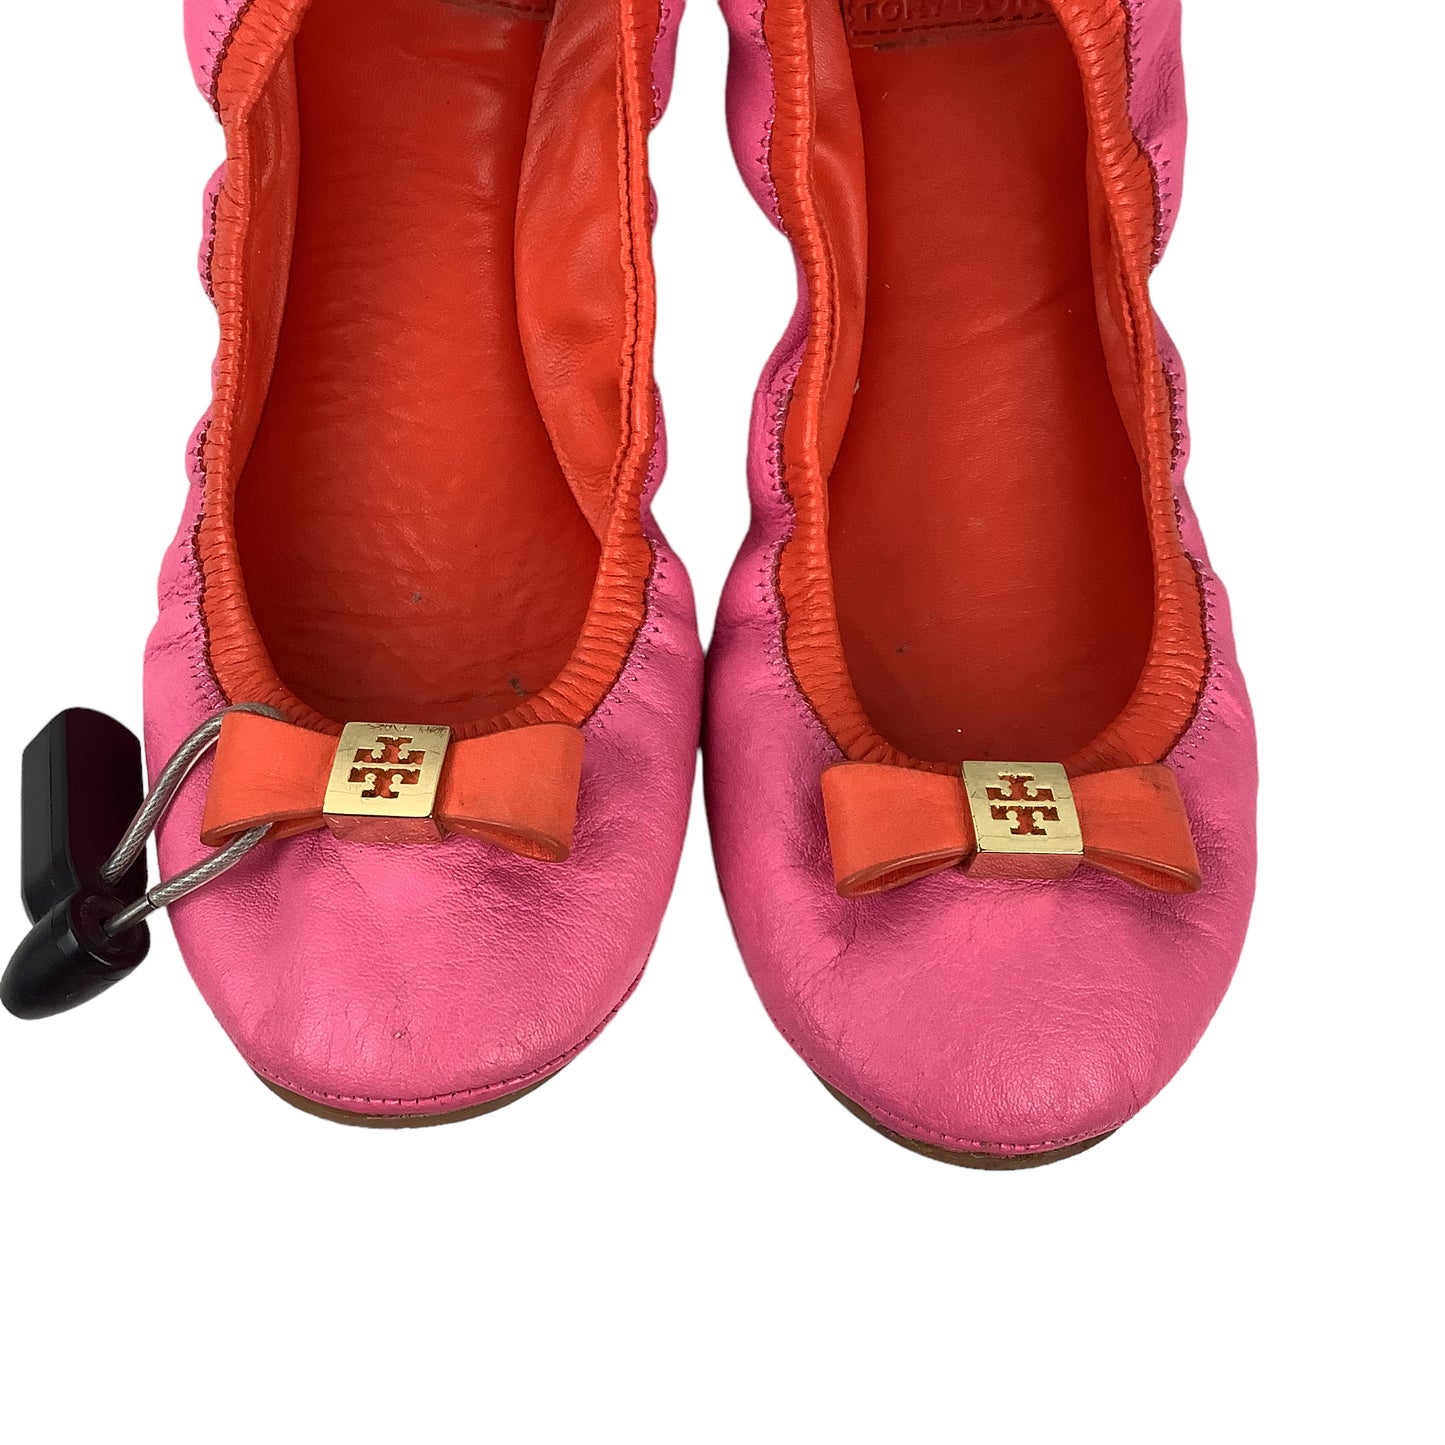 Shoes Designer By Tory Burch  Size: 6.5